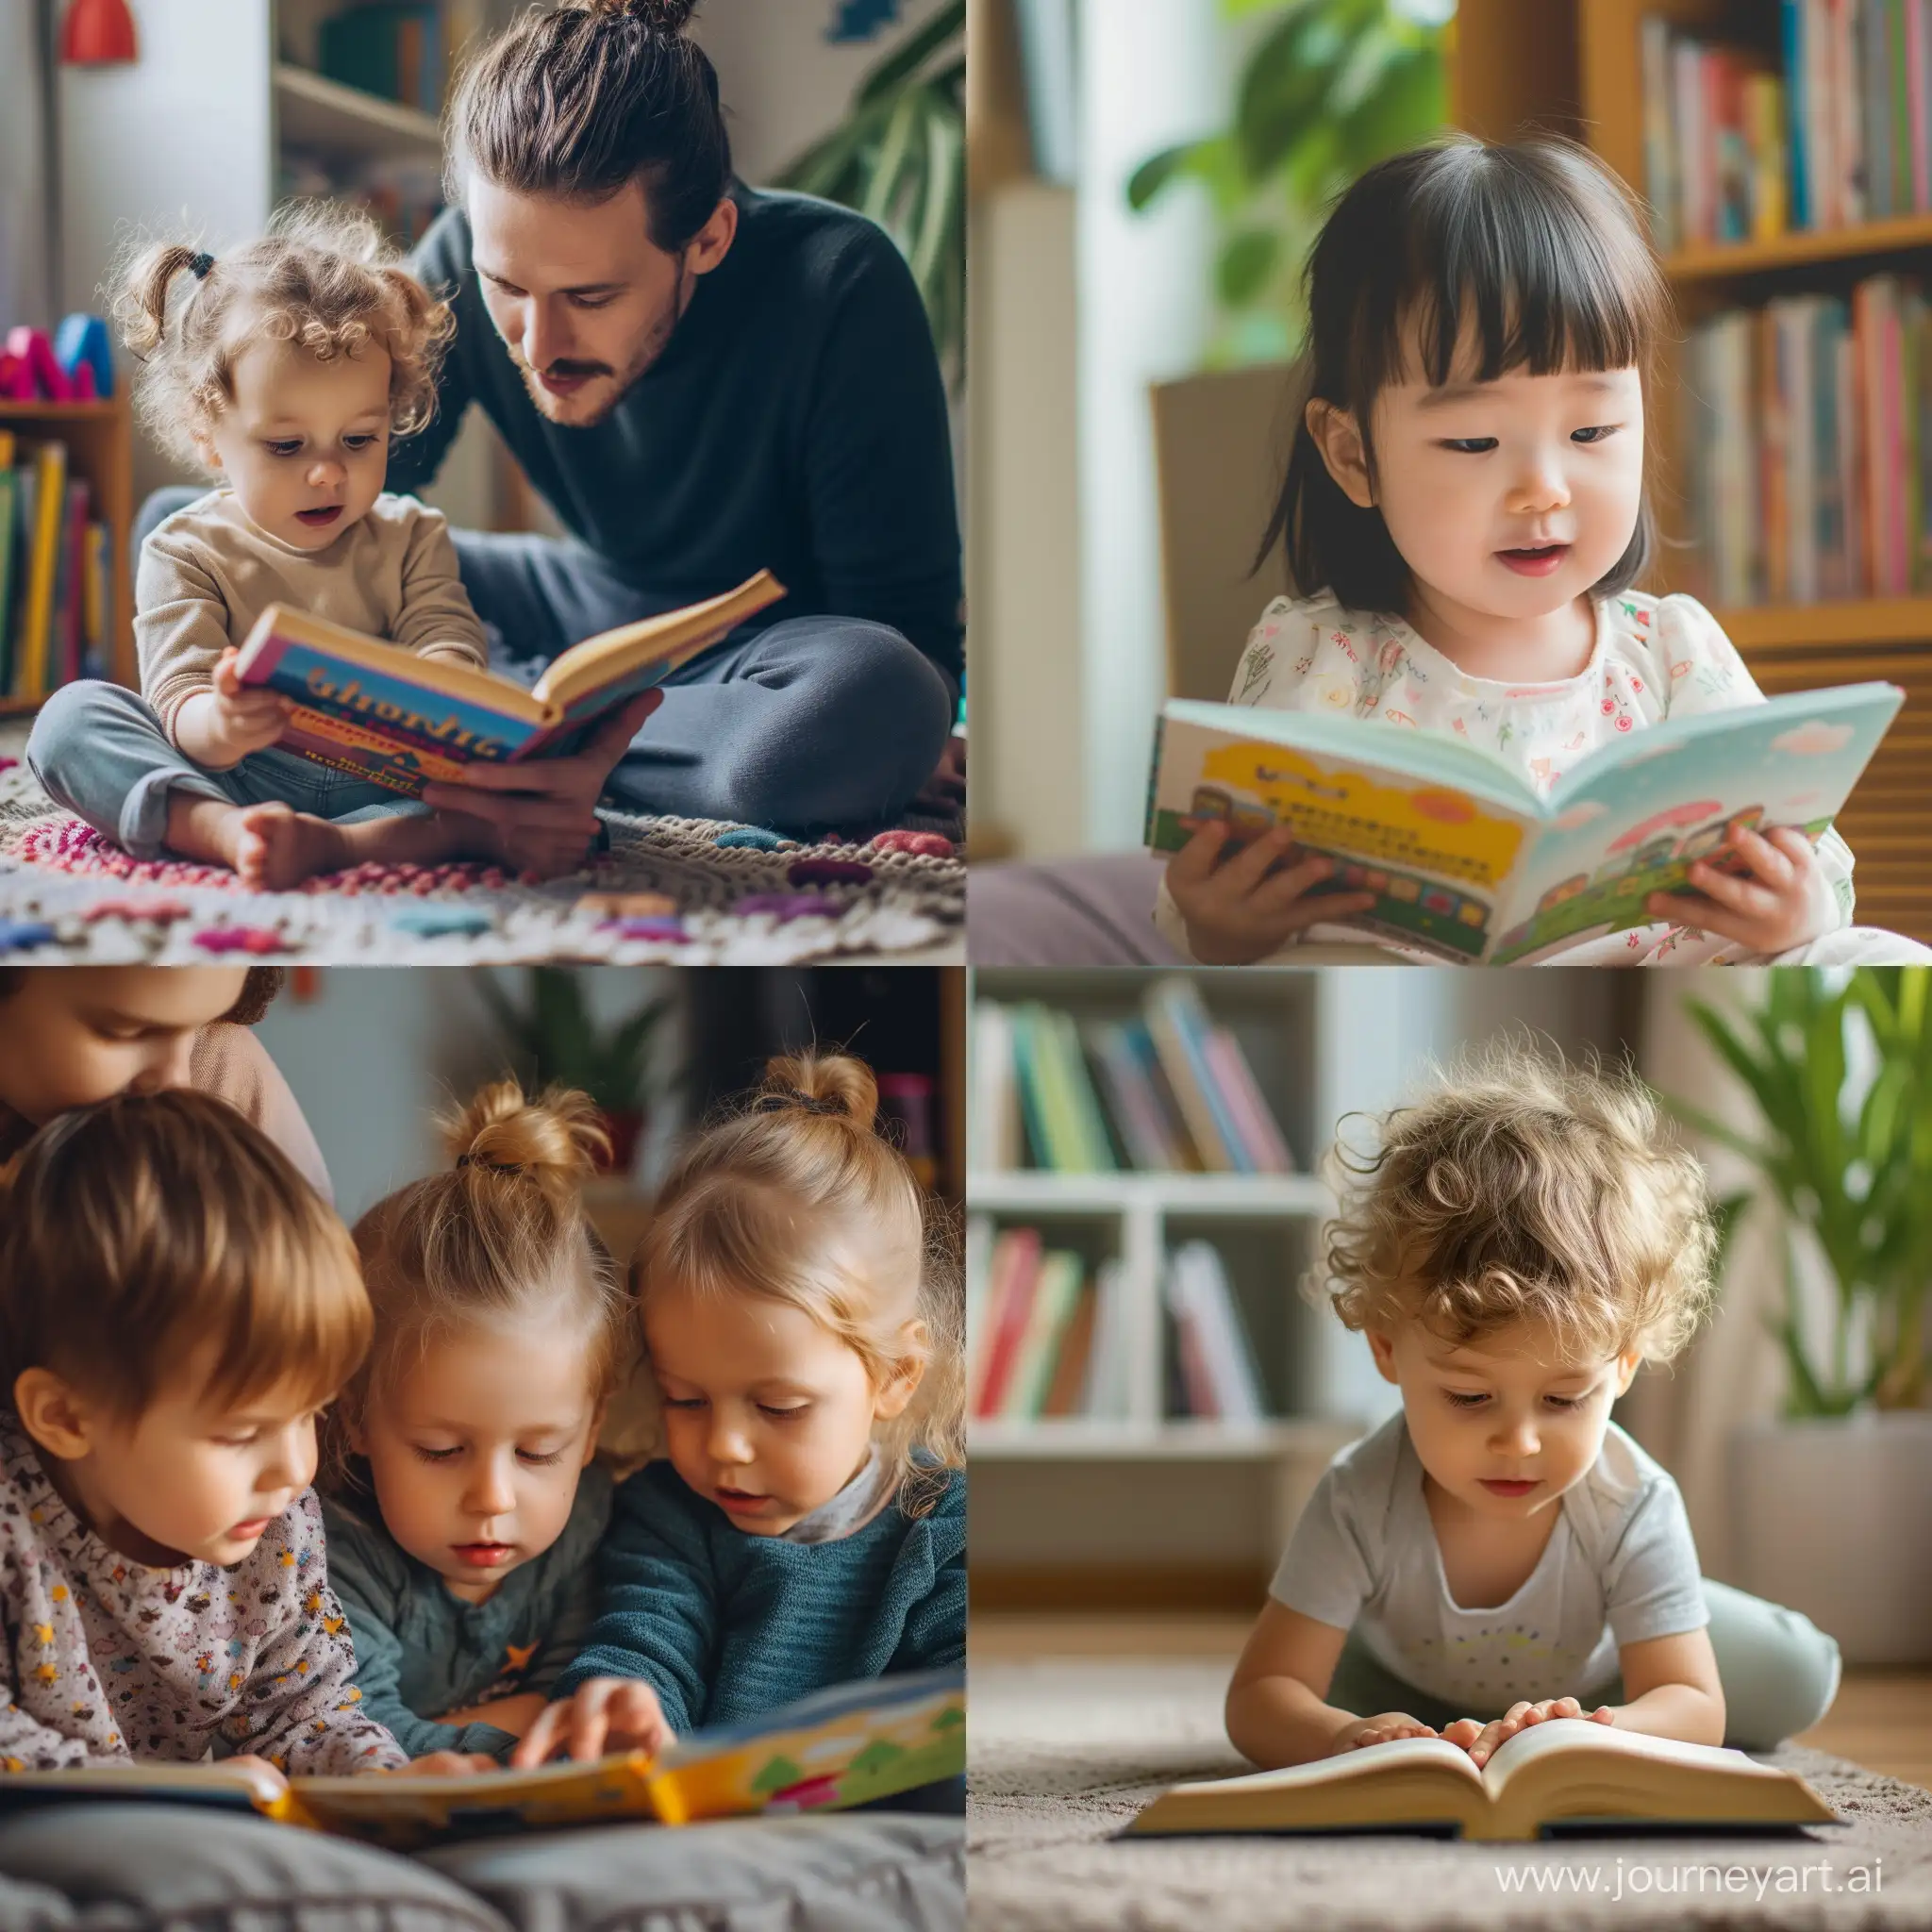 🌐 Dive into children's language development! 🧠👶🗣 Kids soak up languages like sponges! 💬👦 Preschool years are prime for learning. But how does it work with two languages? 🤔🌍 📚 No trouble with two languages! Studies show learning multiple languages doesn't cause issues; it enhances development. First words come around age 1, word combos at 18-24 months. 🤹‍♂️ Bilingual nuances Kids may excel differently in each language, like better sentences in one, richer vocab in another. Focus on overall skills, not just one language. 🌈 Newcomer adventures For immigrant families, speaking their language at home aids development. Adapting to a new language environment takes time but is normal. 👨‍👩‍👧 Both parents speaking French Effort is key for bilingualism. Strategies like language schedules help. 🌟 Tips for fostering bilingualism Speak your native language to your child. Create a bilingual social circle. Expose them to books, movies, music in both languages. Immerse them in experiences in the minority language. 🤷‍♂️ When to worry? Consult a speech therapist if you suspect delays. Multilingualism shouldn't worsen issues. --v 6 --ar 1:1 --no 78186